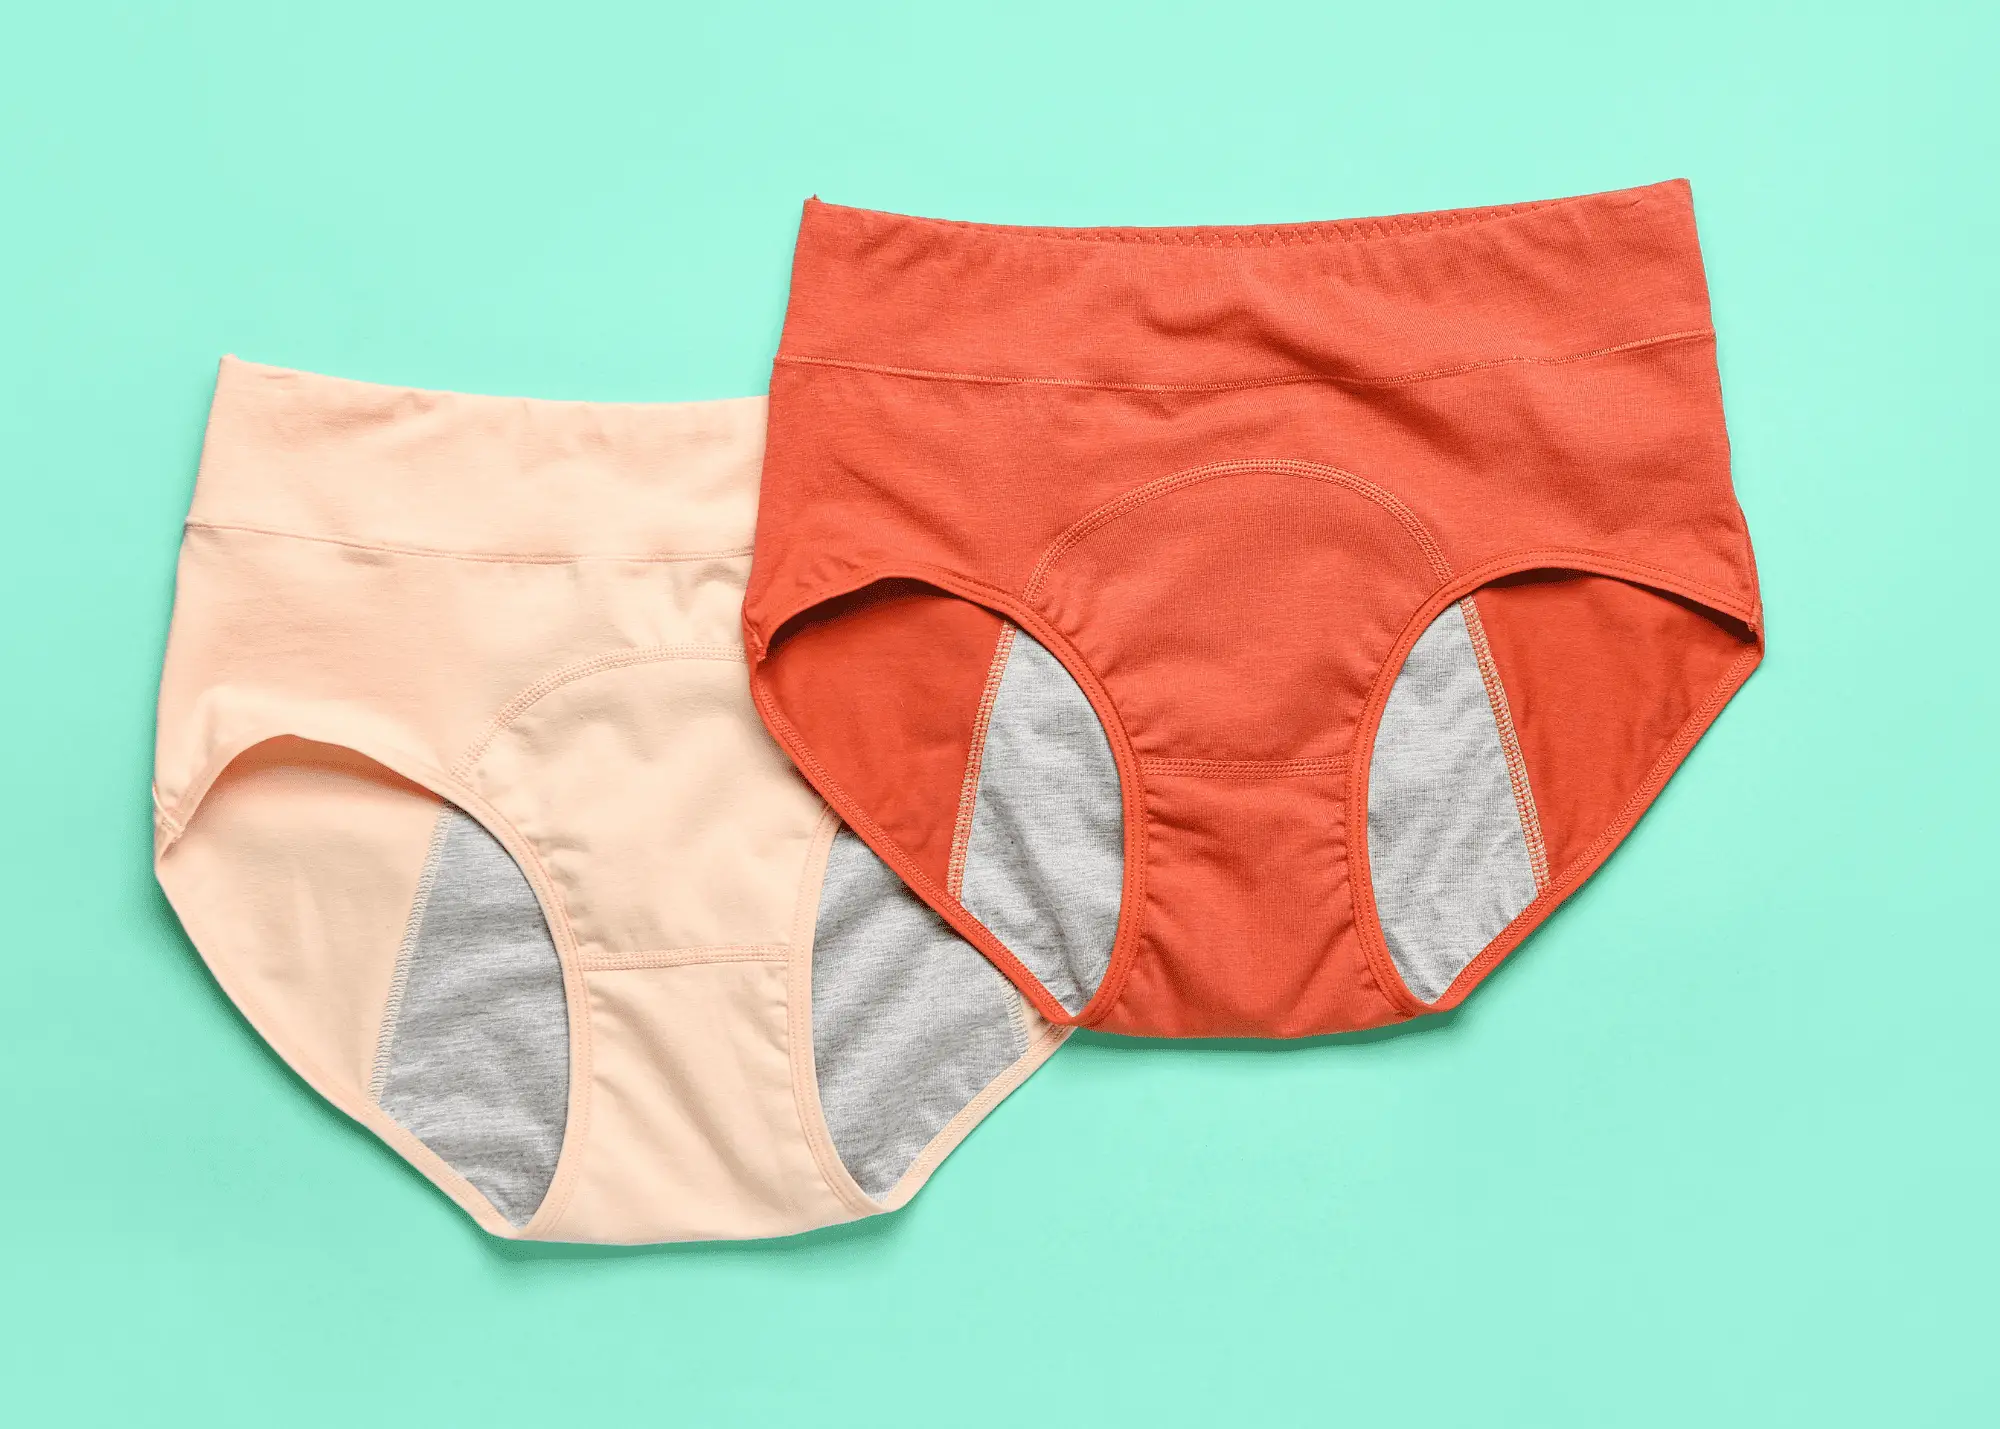 two pairs of period underwear on a green background